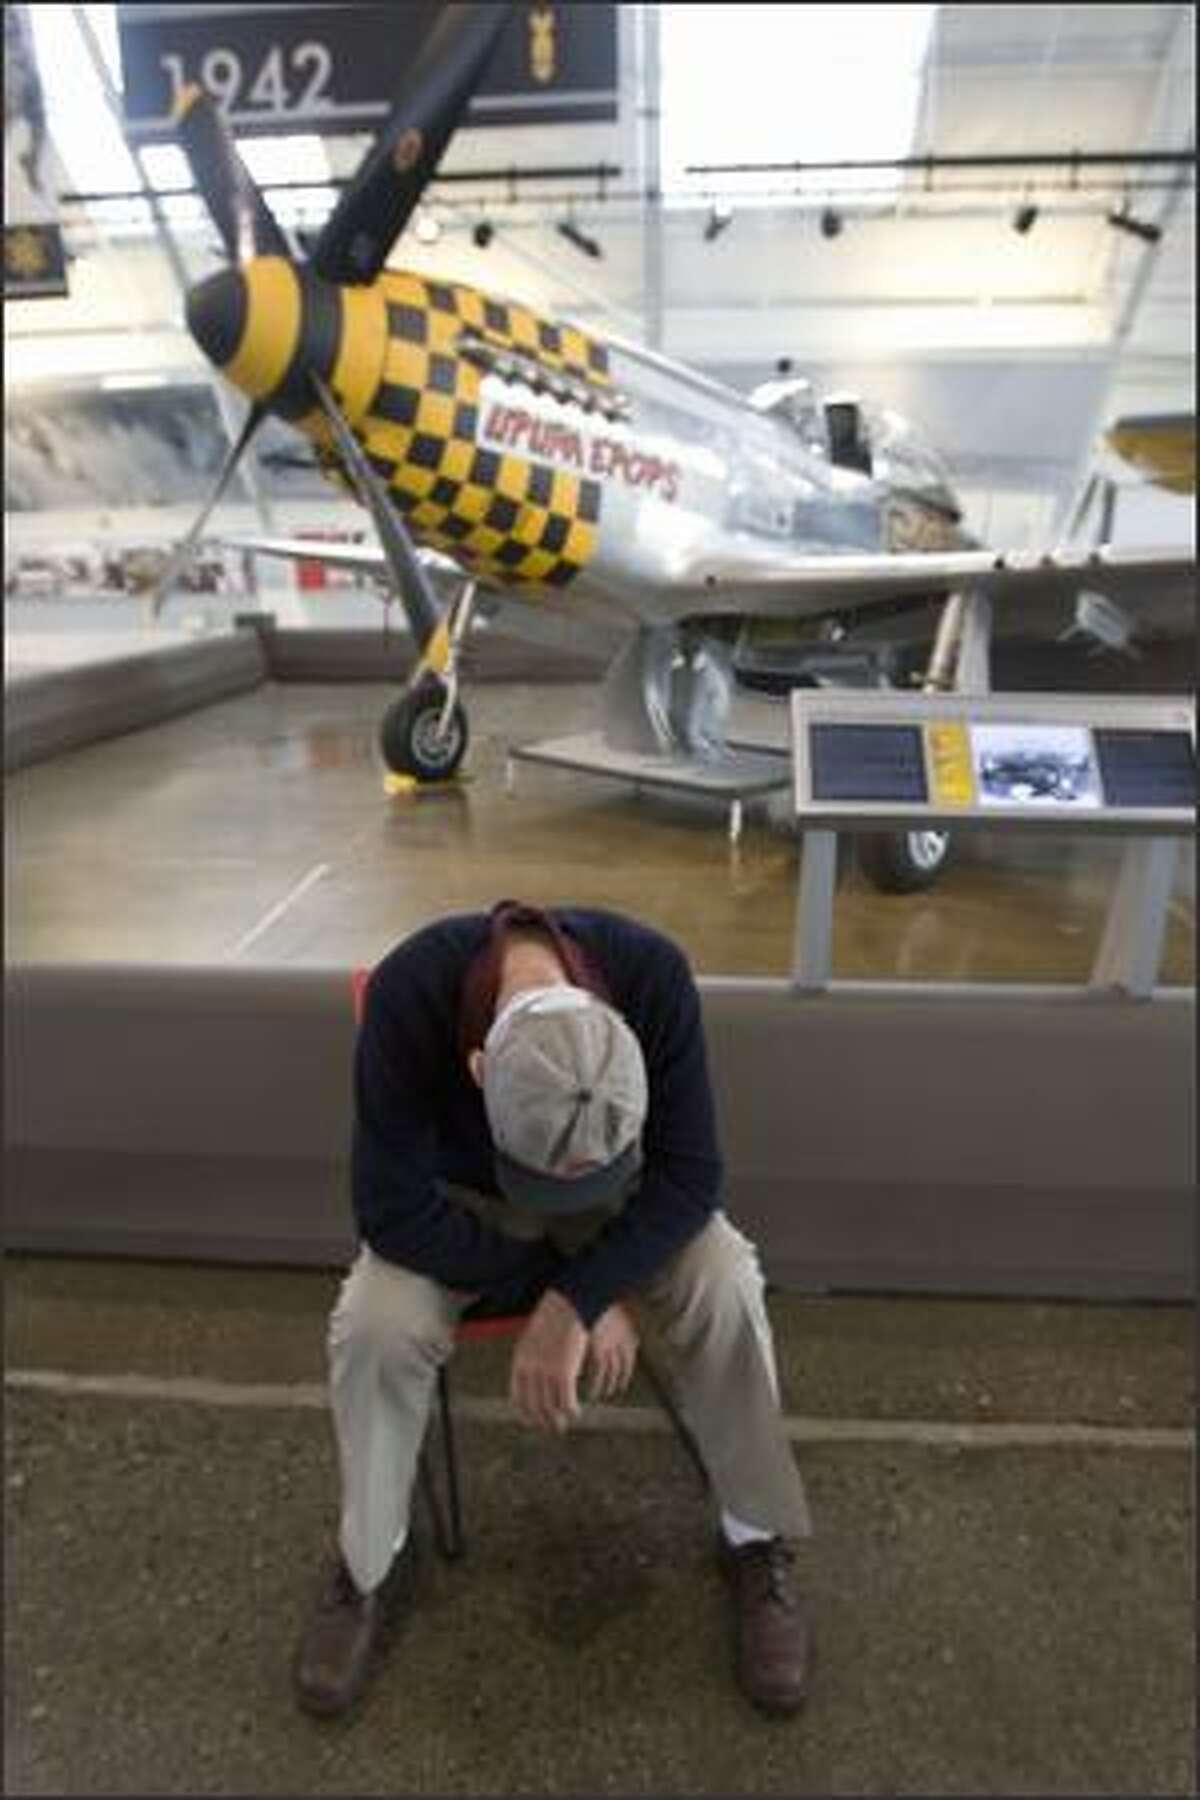 Harrison "Bud" tordoff, who flew more than 1,000 hours of combat in WWII and piloted the P-51 Mustang, behind him, against the Germans, takes a quick nap after talking to a group of visitors.